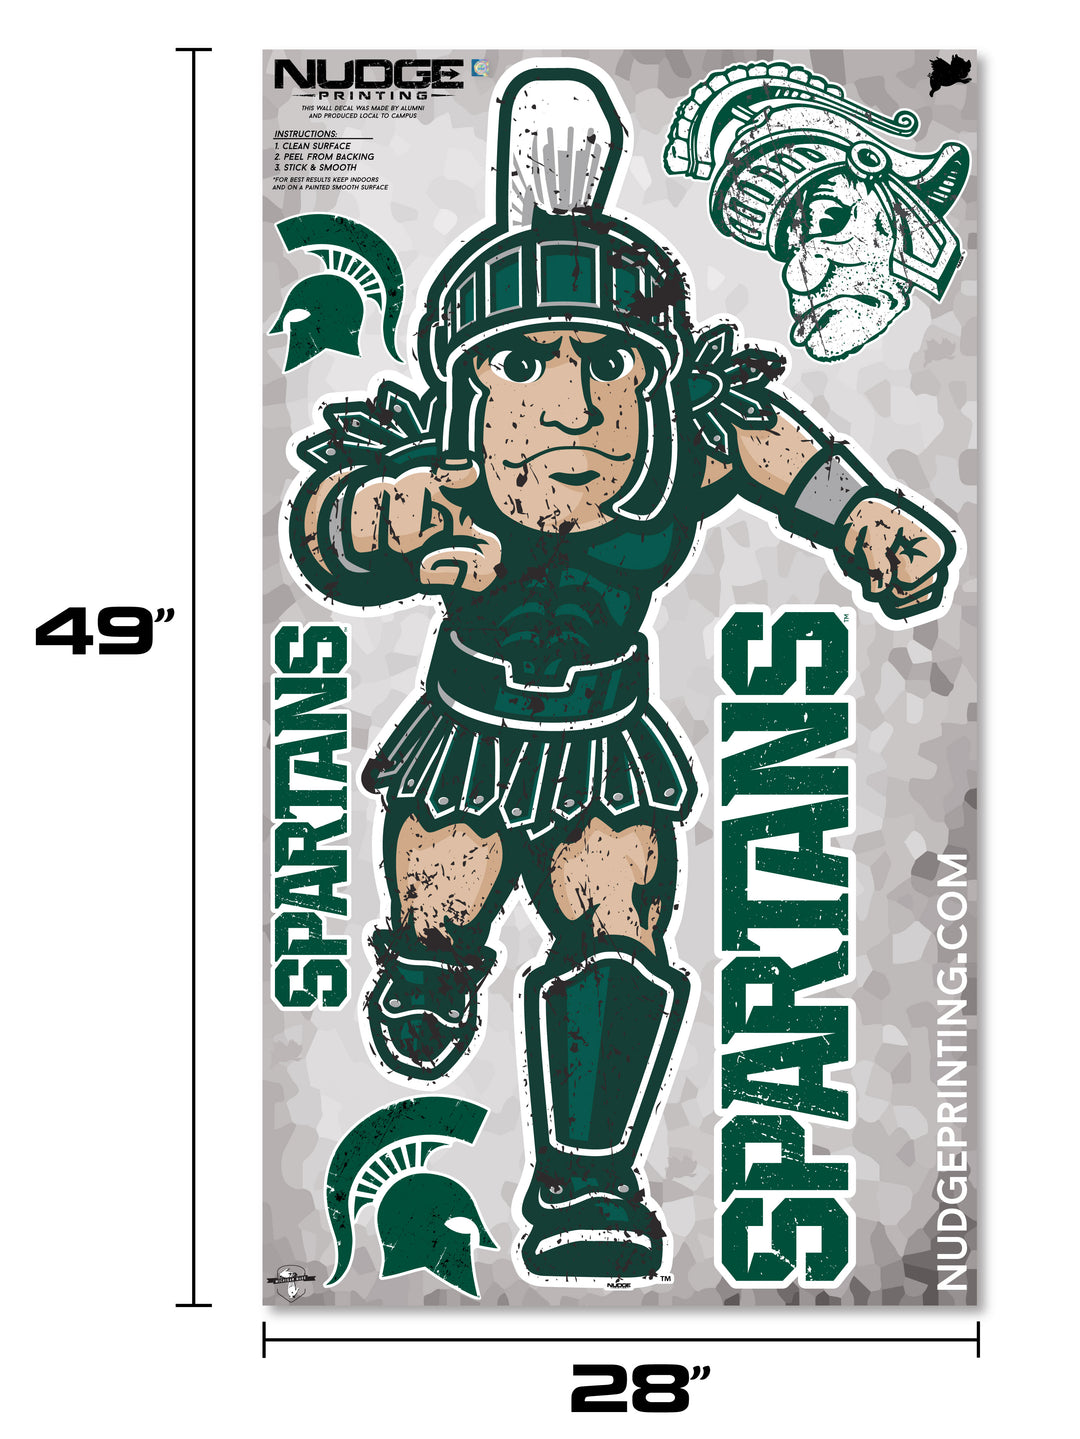 Michigan State MSU Spartans Ready for Battle Sparty - XL Wall Decal Sticker Set - Nudge Printing